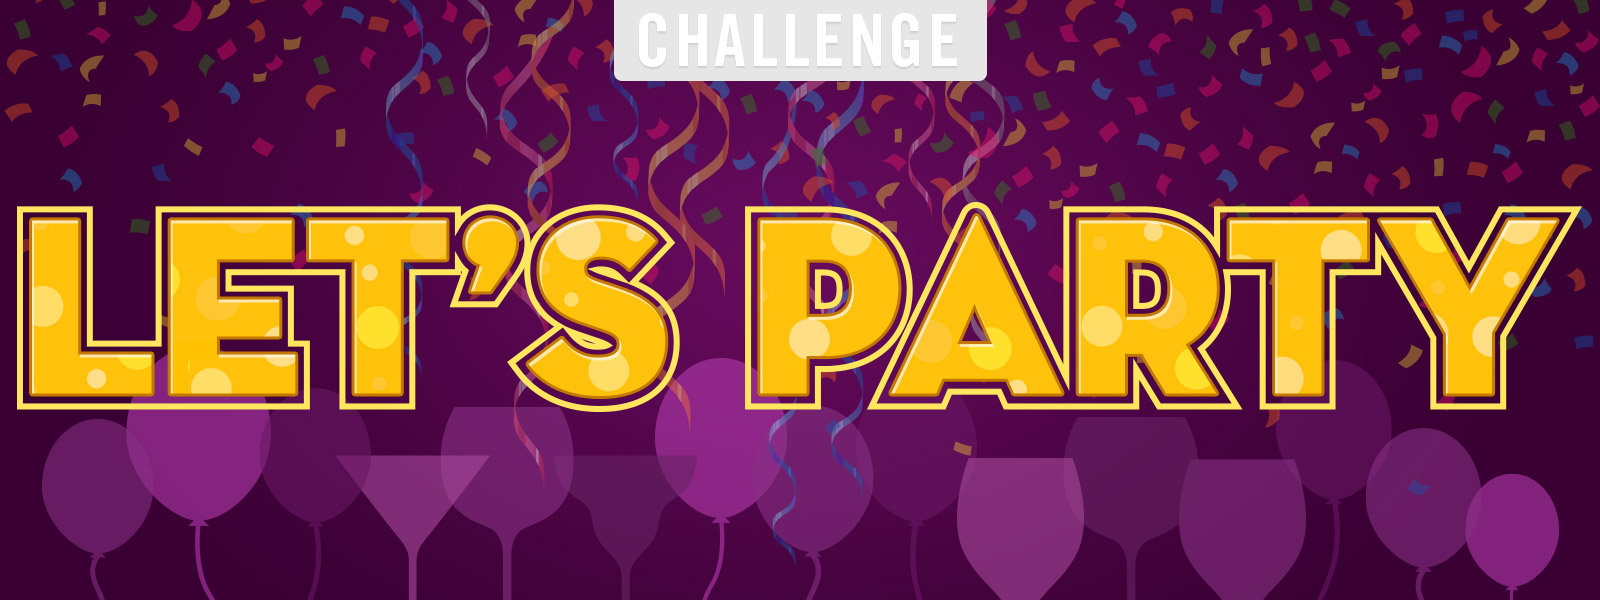 Let's Party Facebook Cover Picture